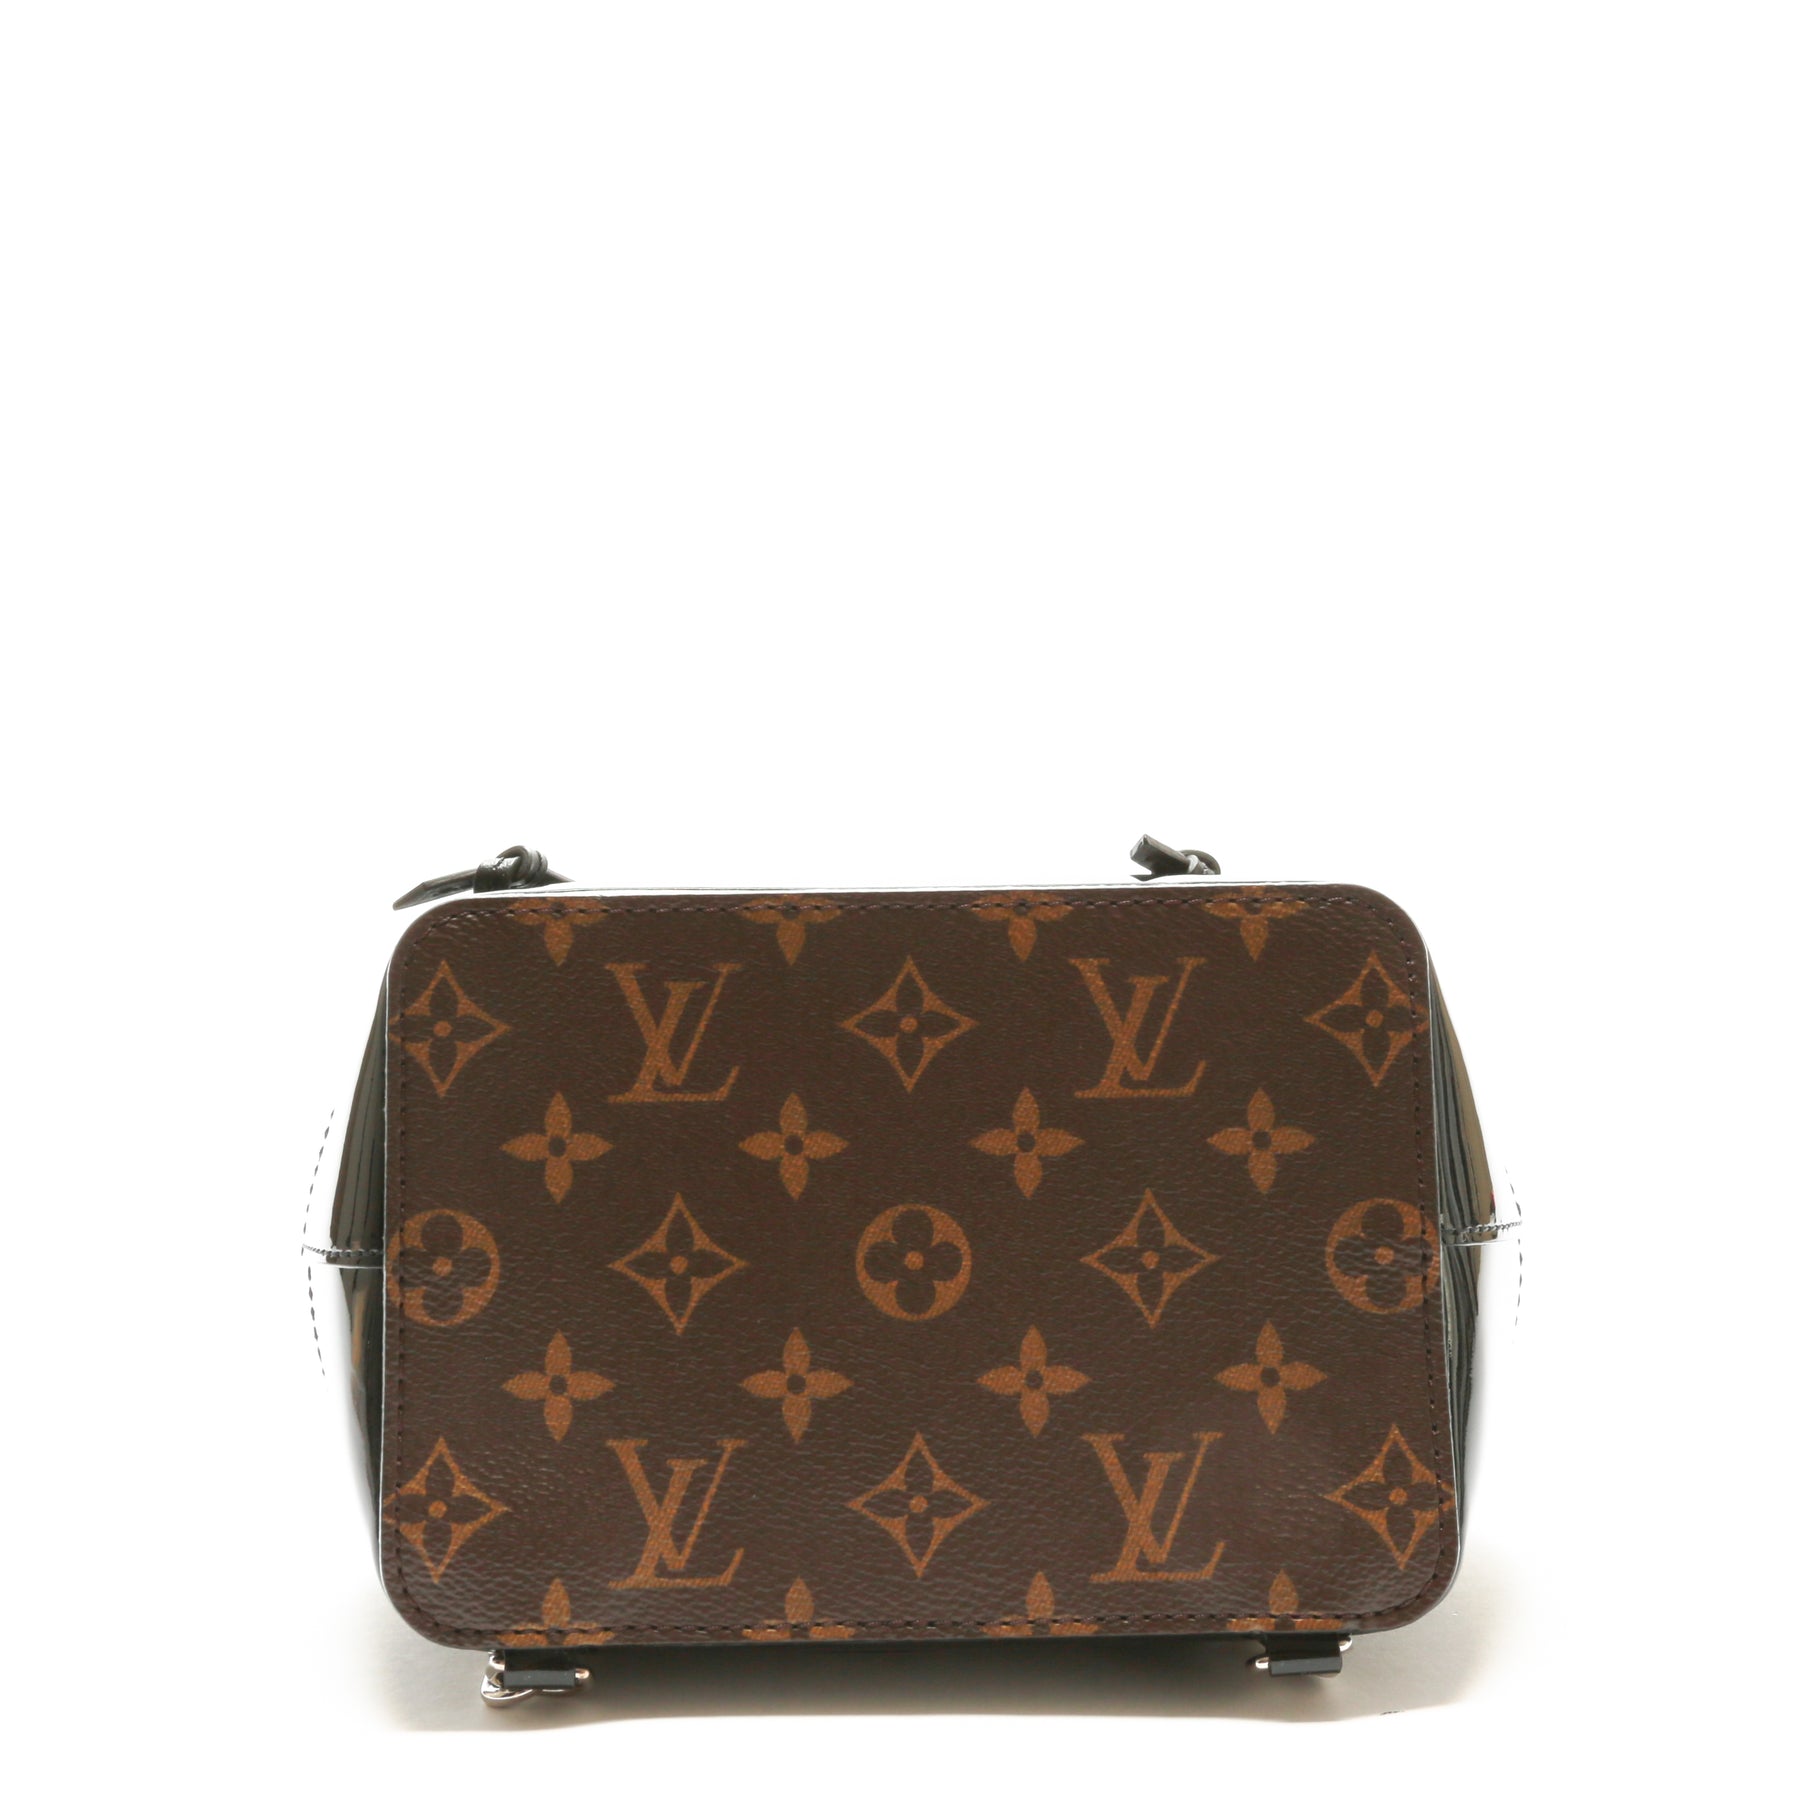 WIMB & Carry Options, Louis Vuitton Hot Springs Backpack, Venus Leather